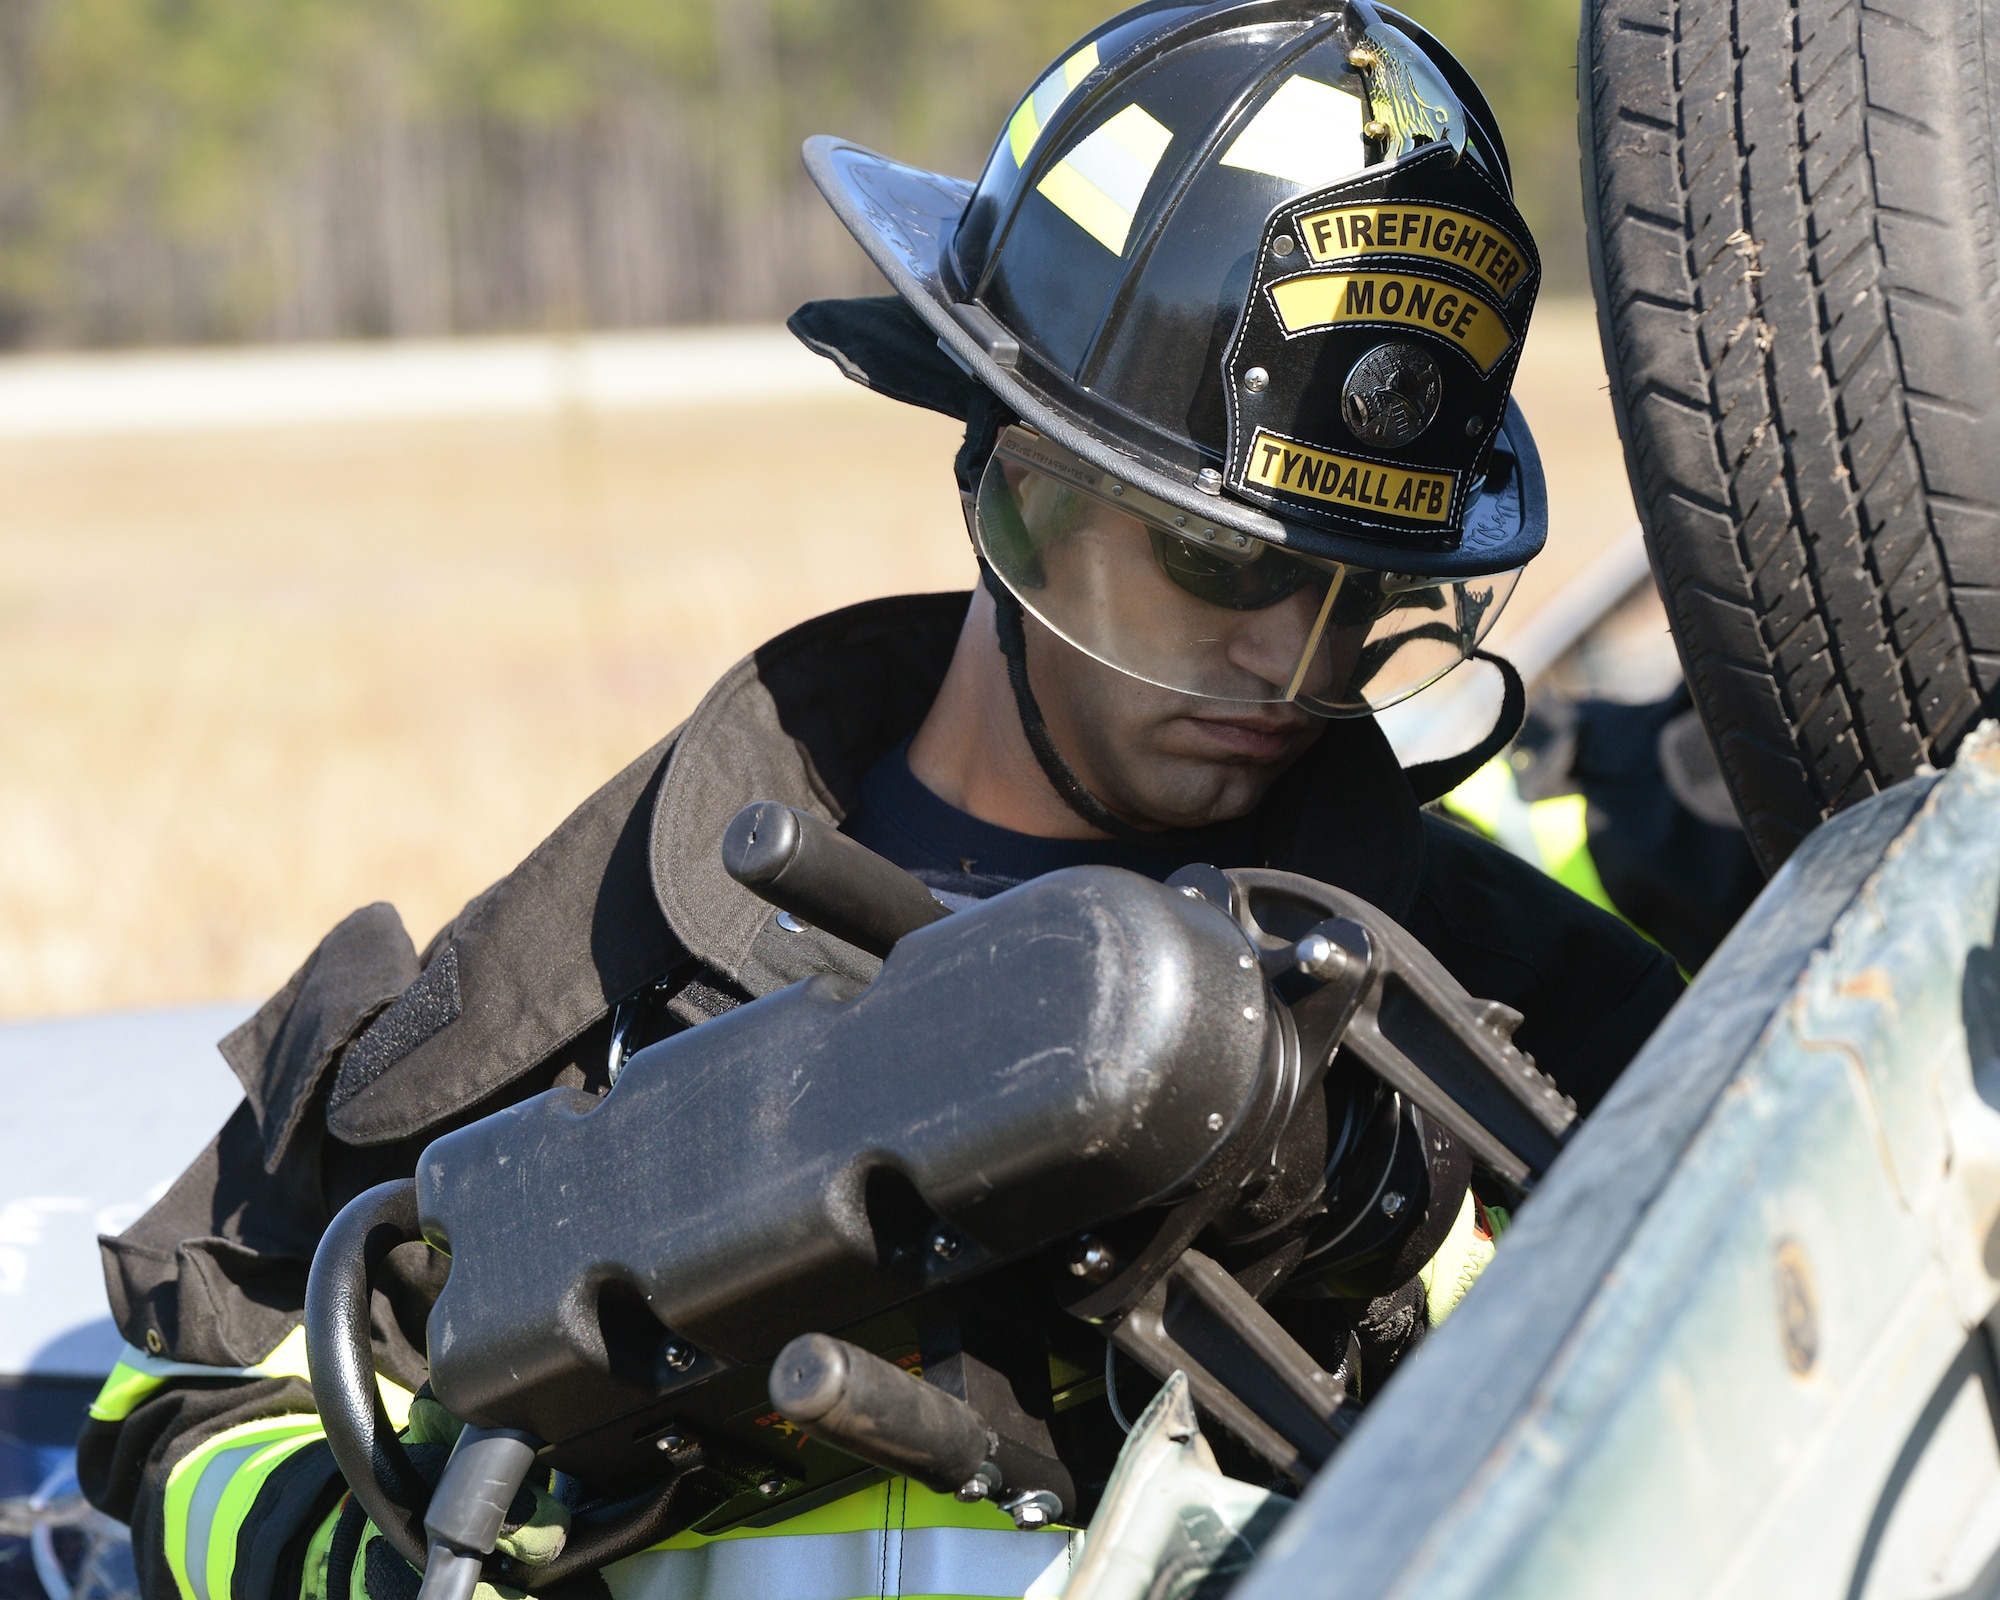 Edward Monge, 325th Civil Engineering Squadron firefighter, uses the jaws-of-life to pry open a crashed car door during a vehicle extrication exercise.  The firefighters of the 325th CES ensure the safety of all of Tyndall’s service members, civilians, and contractors. (U.S. Air Force photo by Airman 1st Class Cody R. Miller/Released)